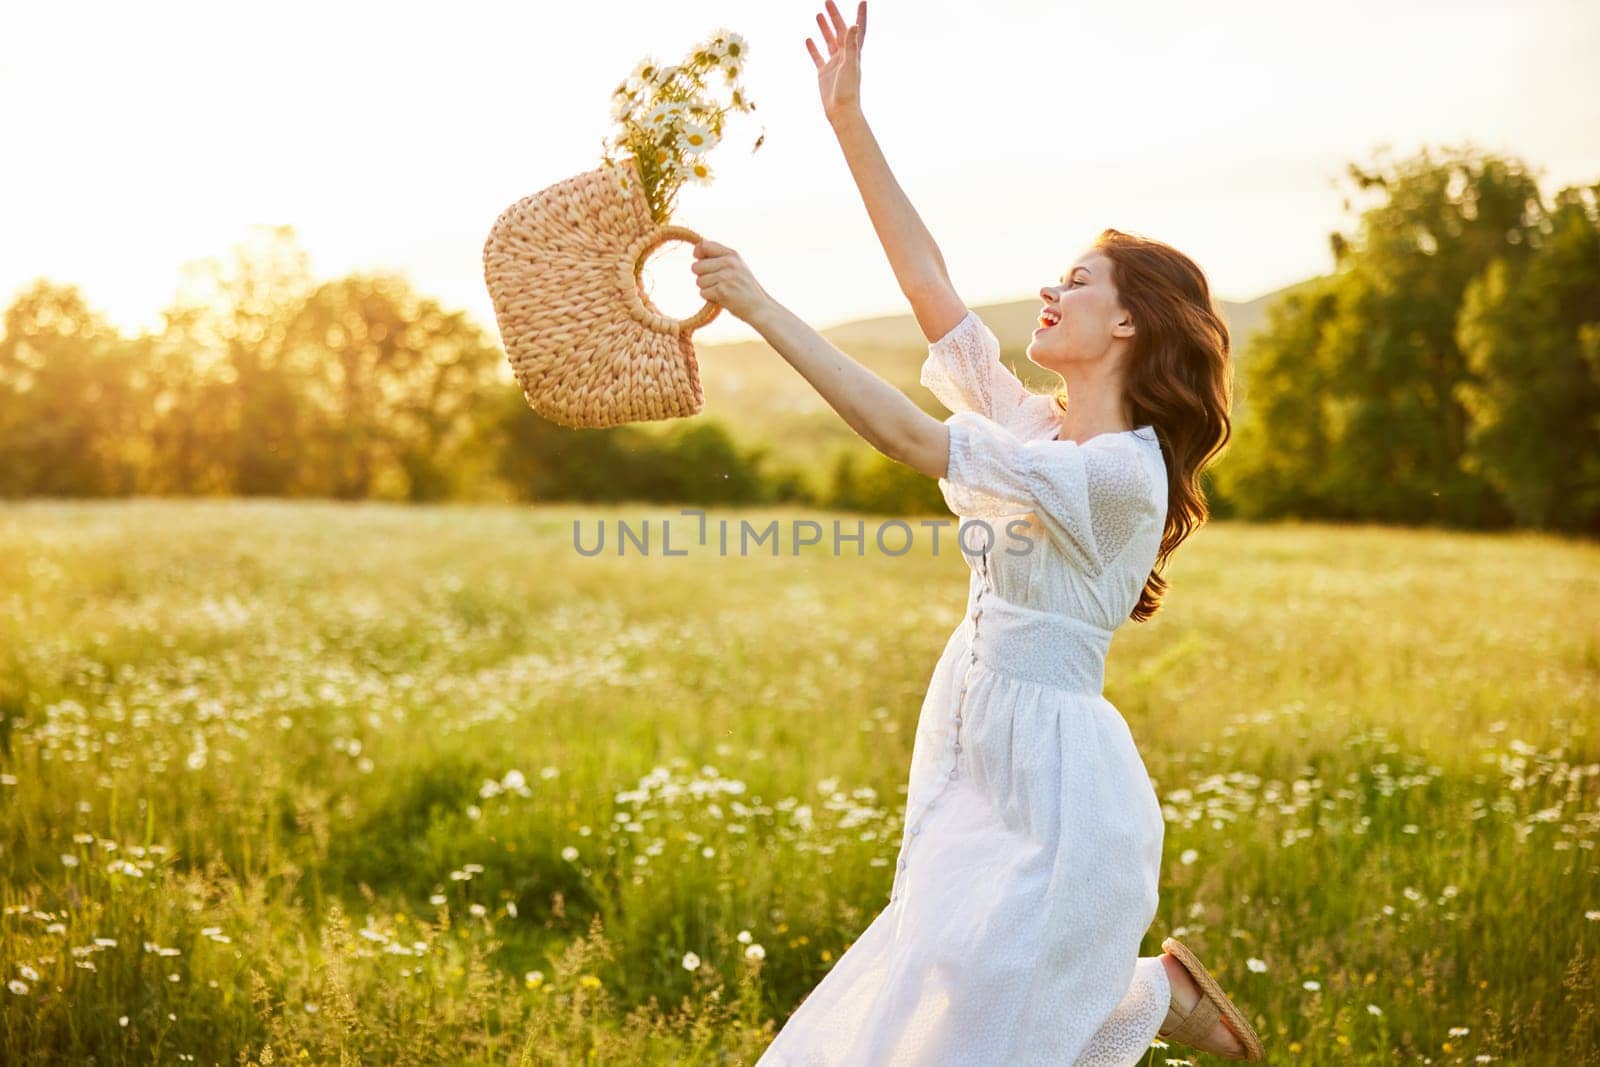 happy woman in a long light dress fool in the field with a wicker basket in her hands by Vichizh